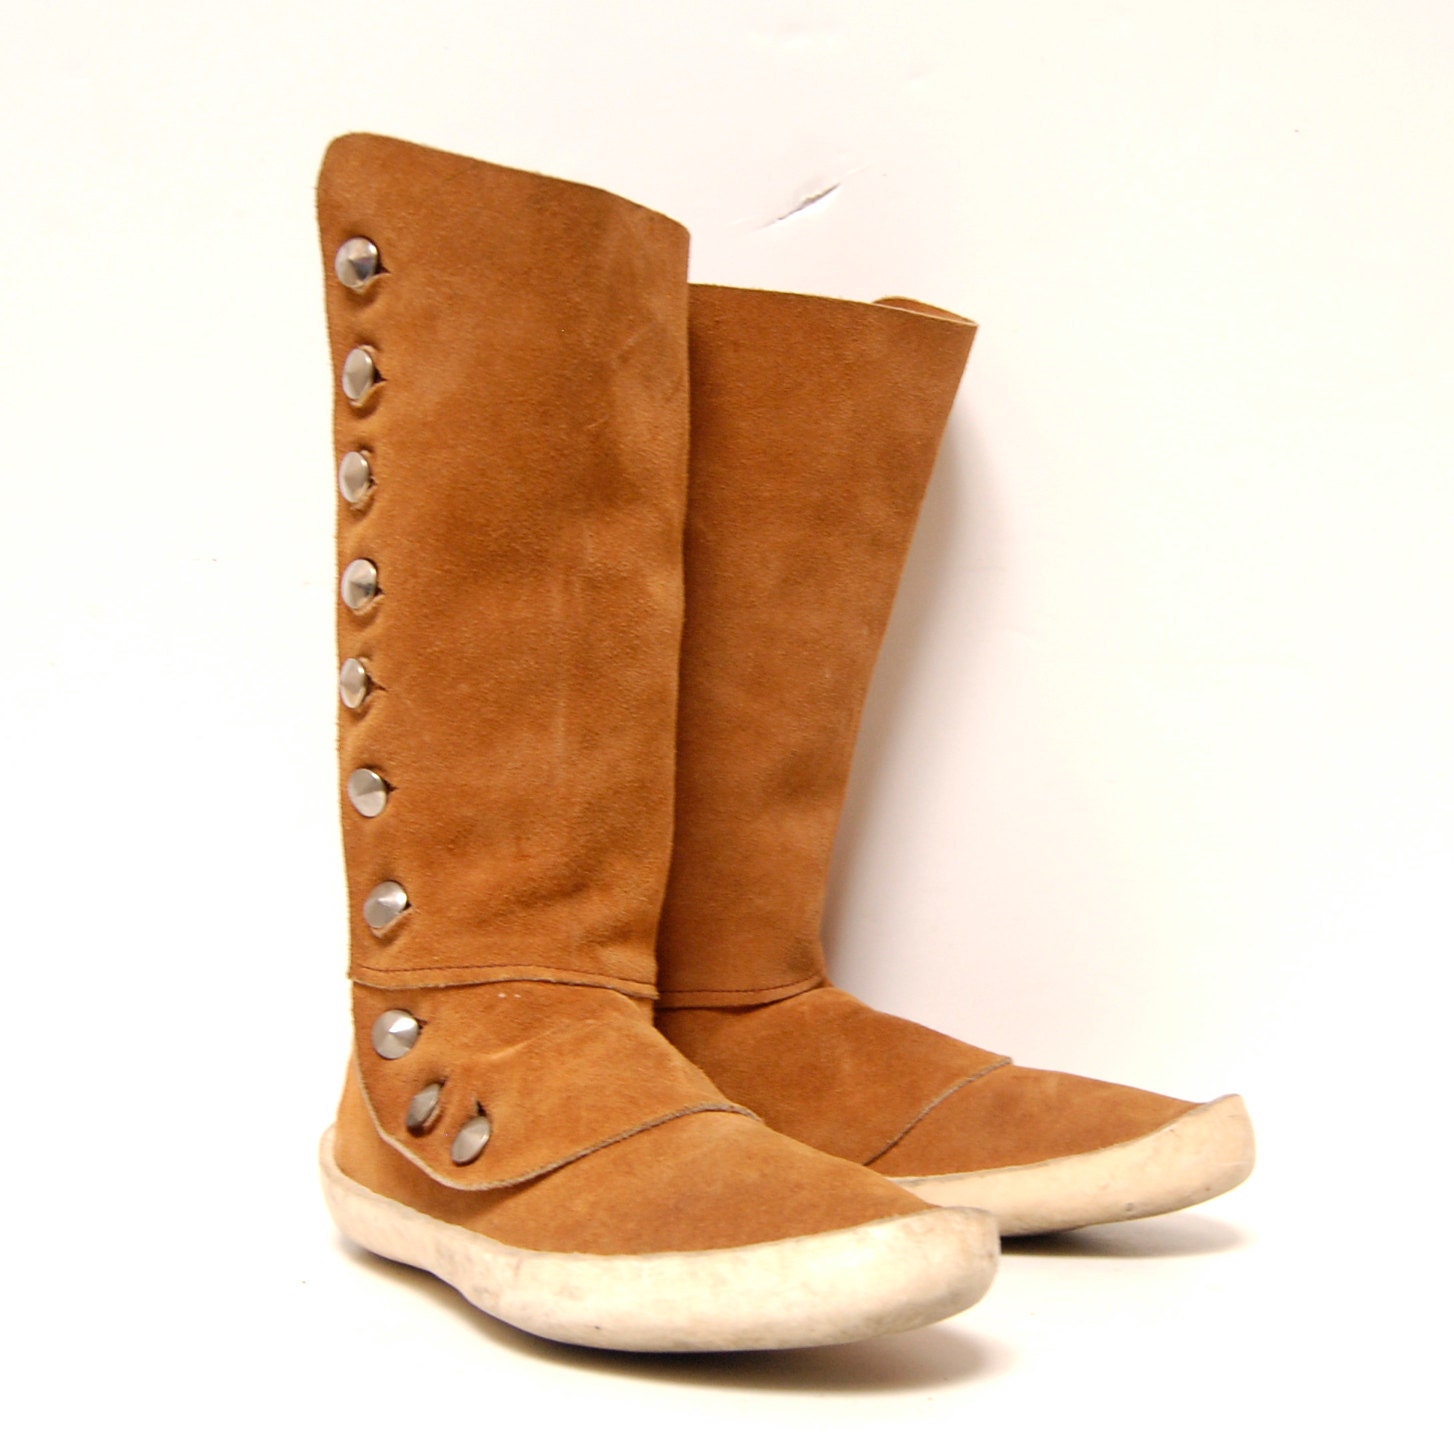 size 10 MOCCASIN tan leather 70s HANDMADE silver metal BUTTONS midcalf boots - 20twentyvintage